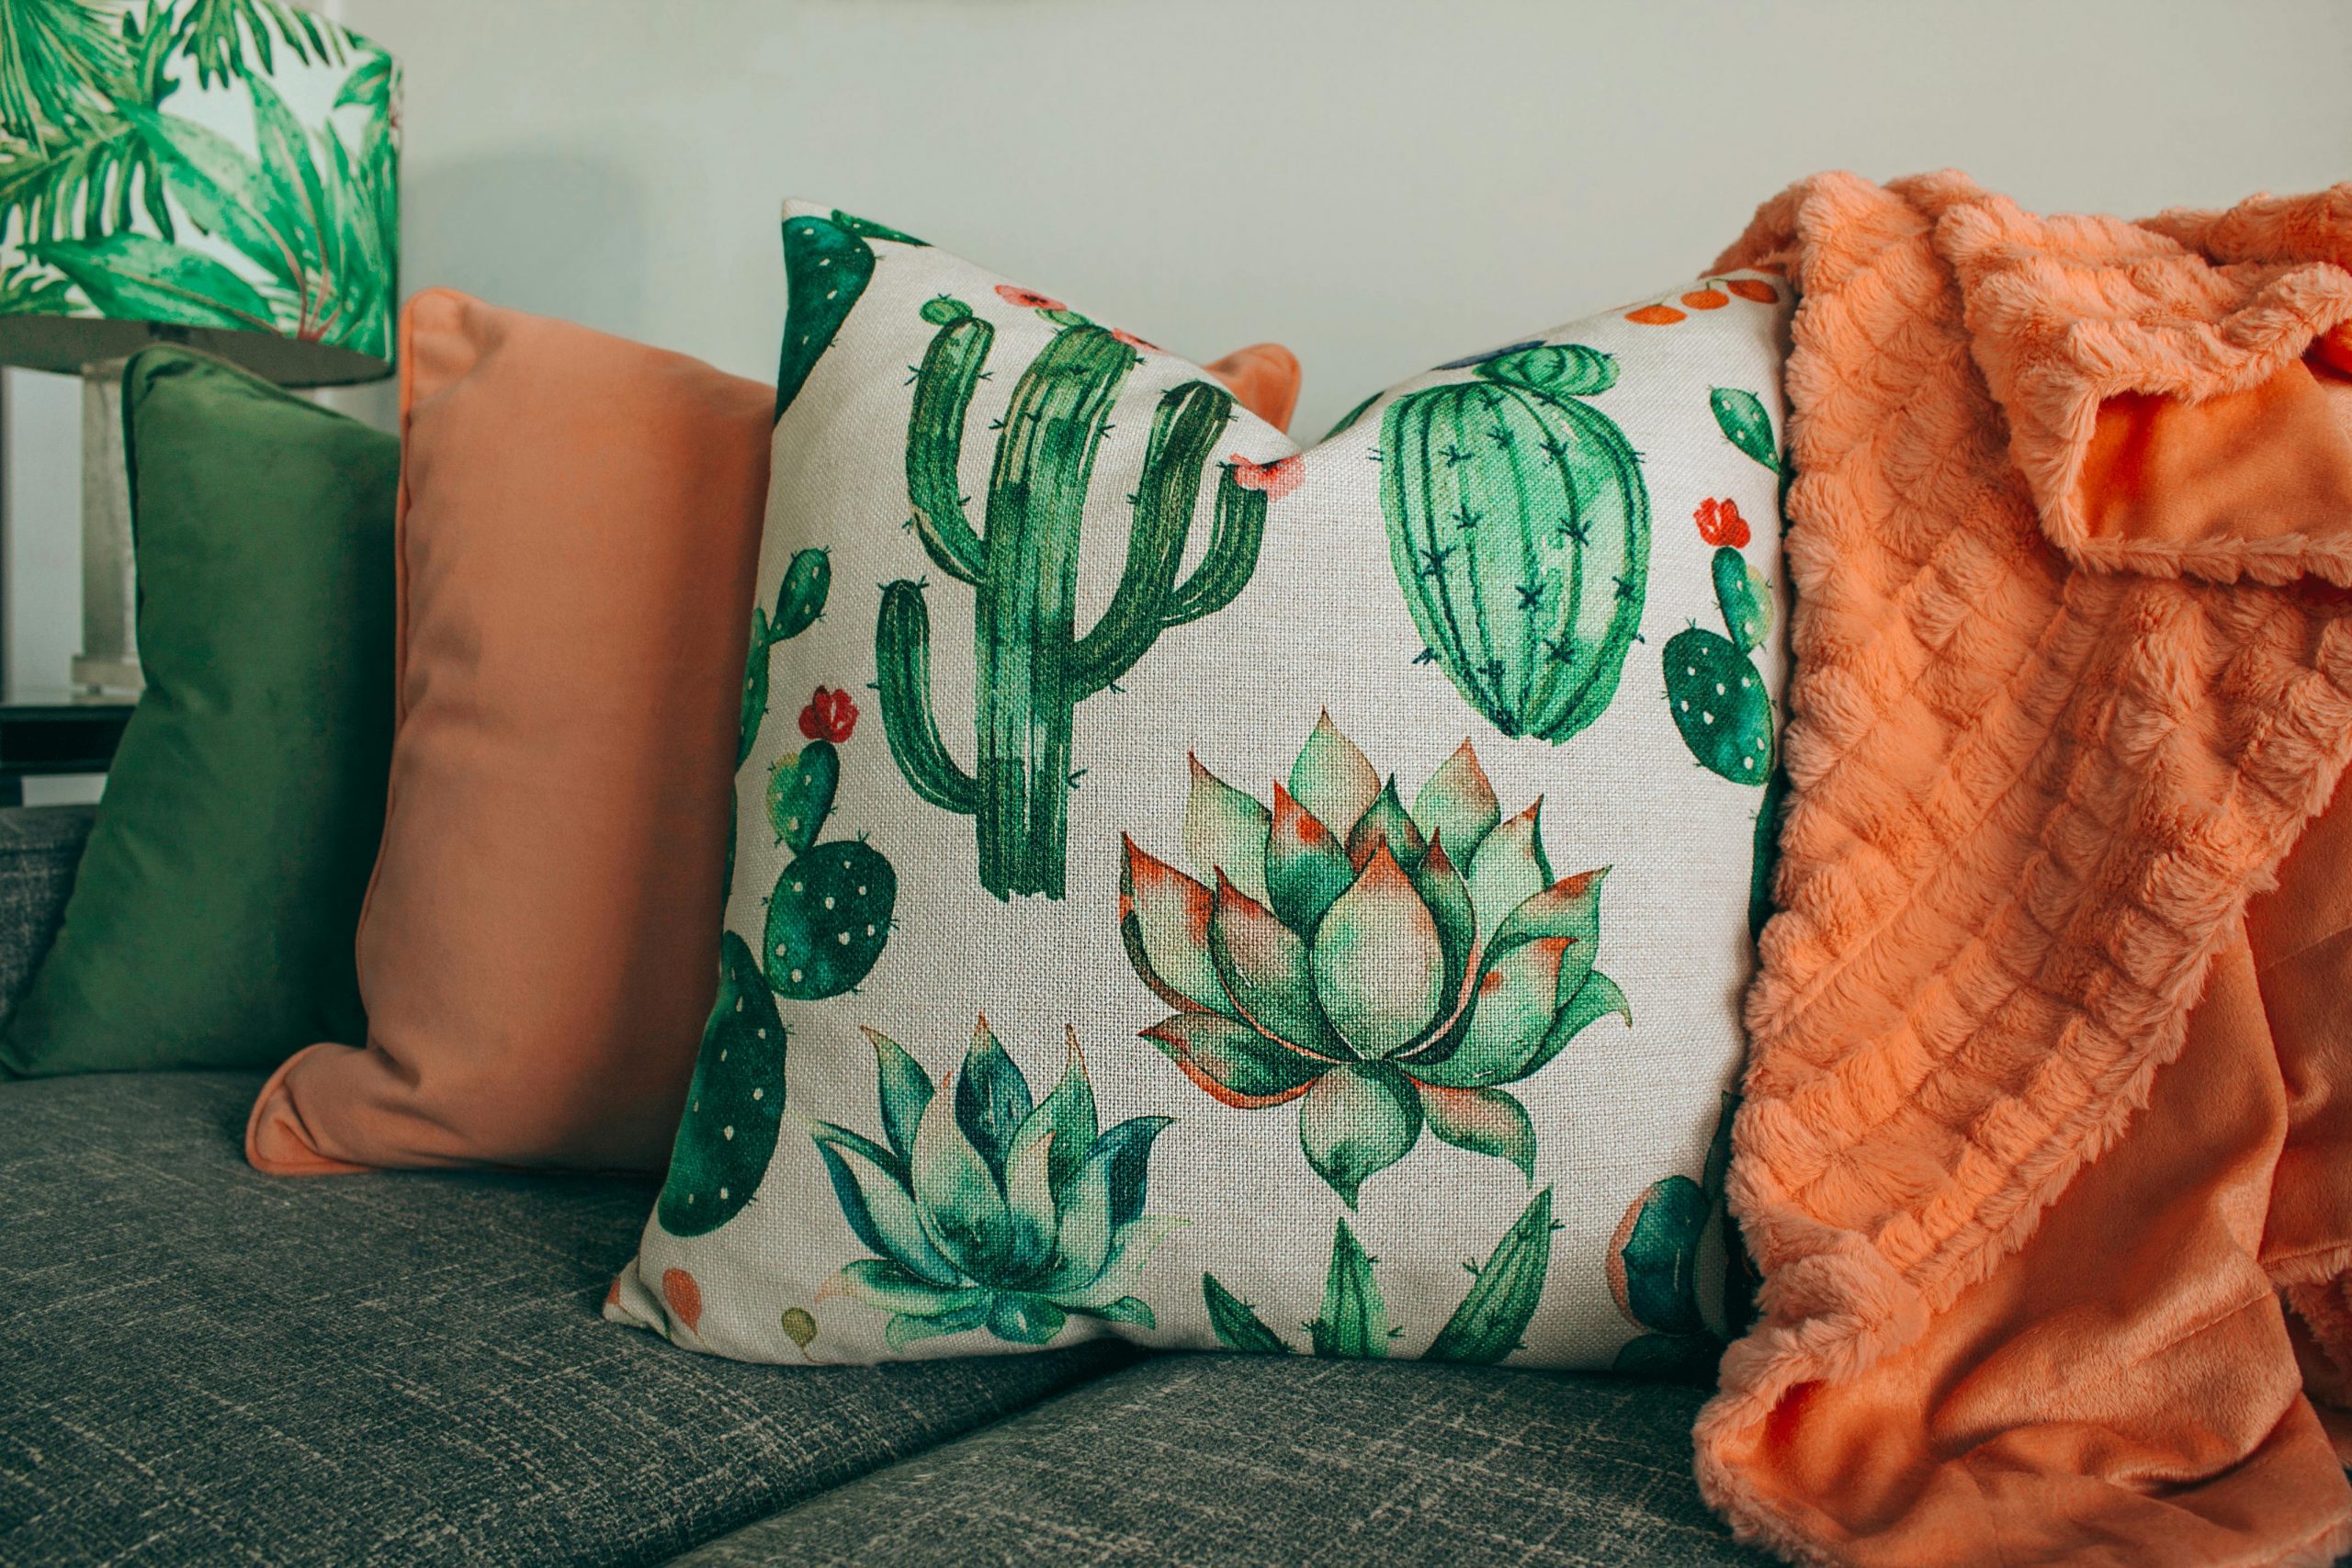 Decorating with throw pillows